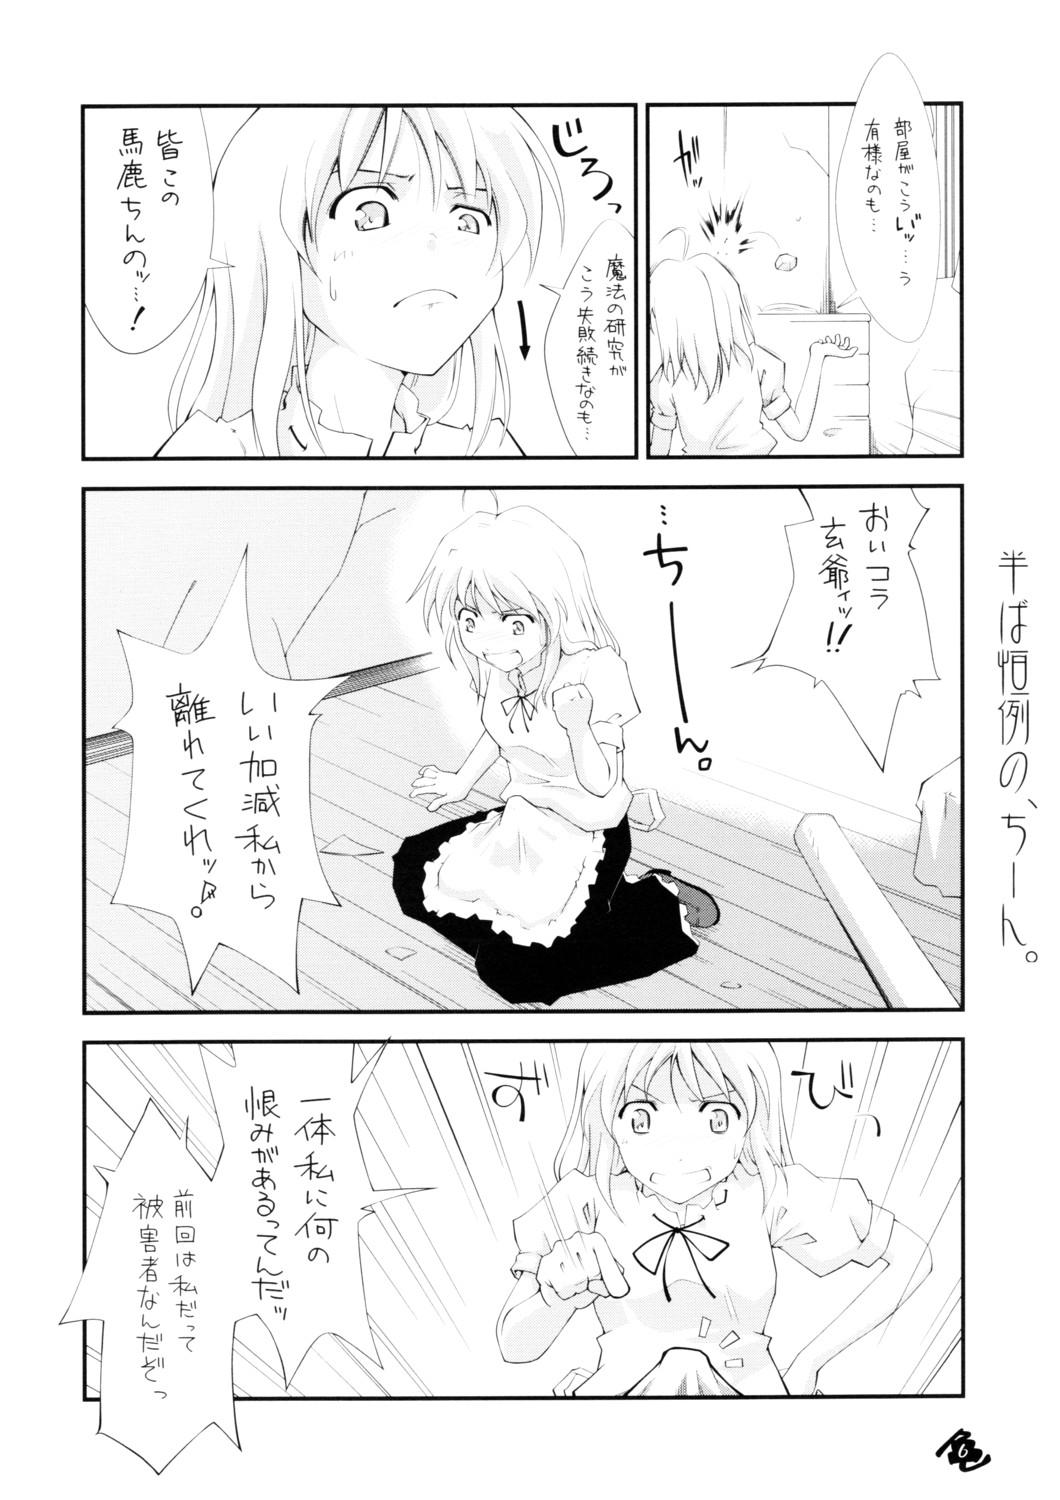 Best Blow Job 東方玄爺録2 - Touhou project Hot Naked Women - Page 5